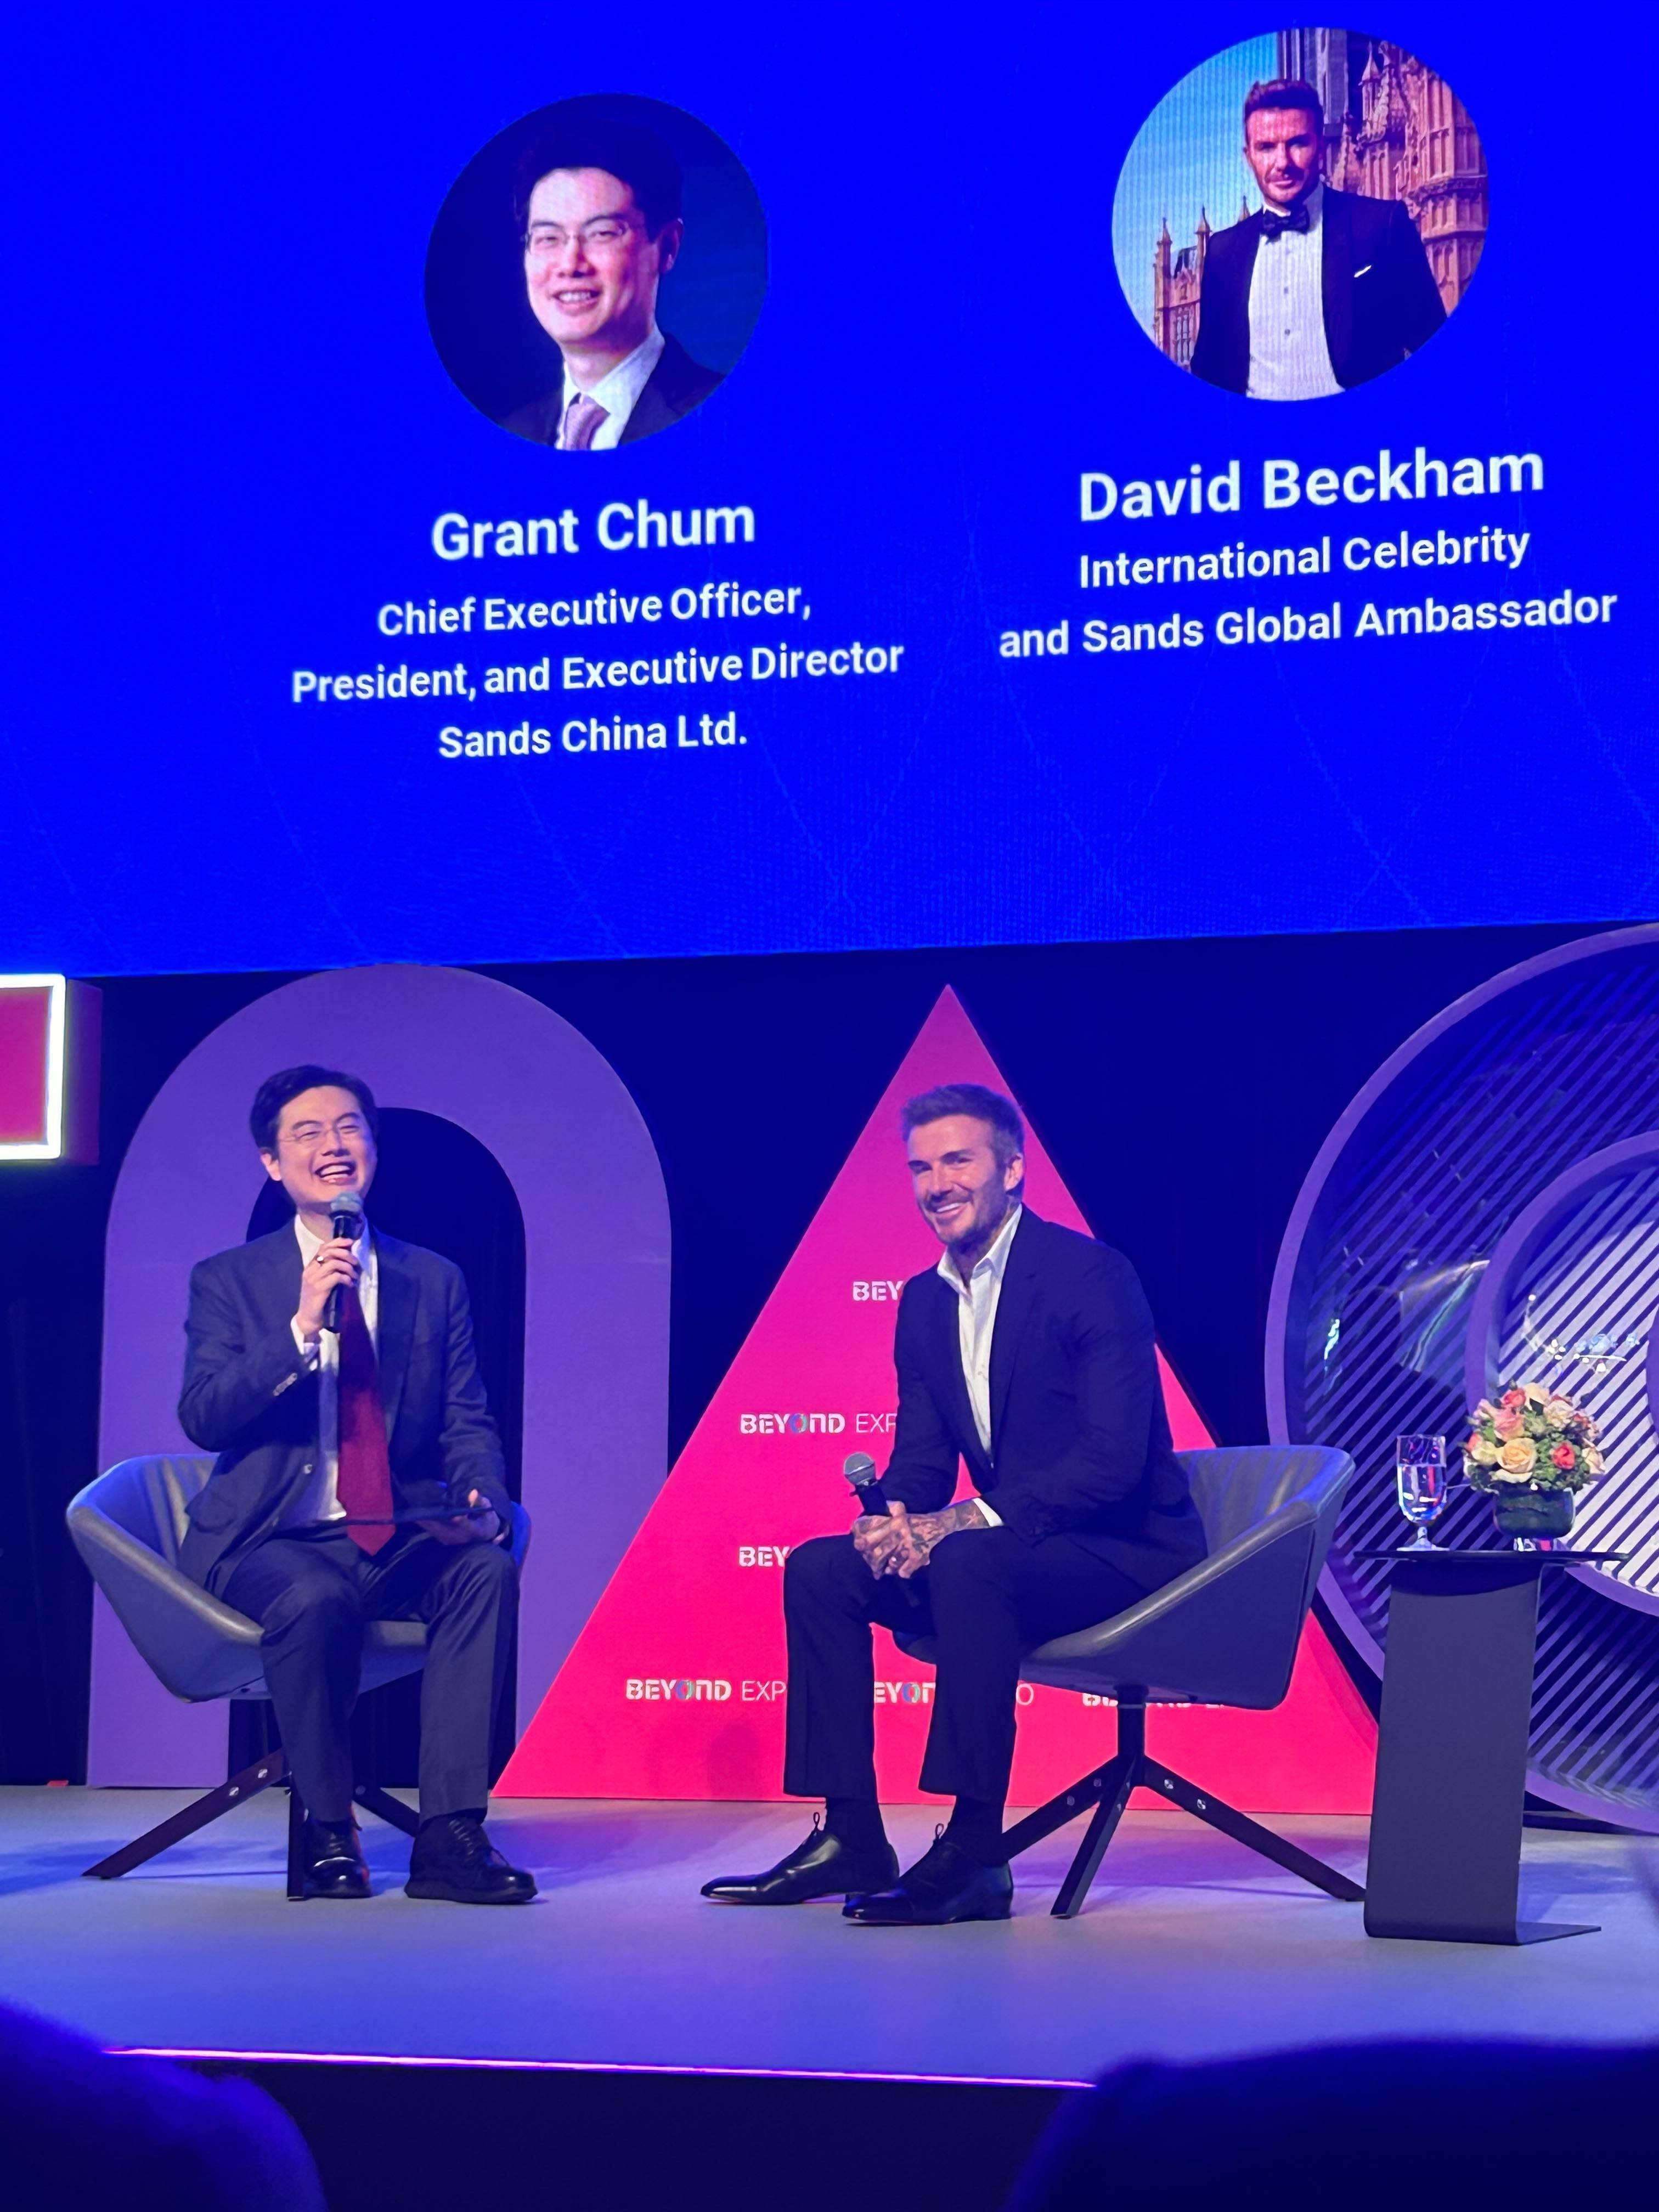 Grant Chum, CEO of Sands China, and former England football captain David Beckham speak at the Macau expo on May 23. Photo: Mia Castagnone